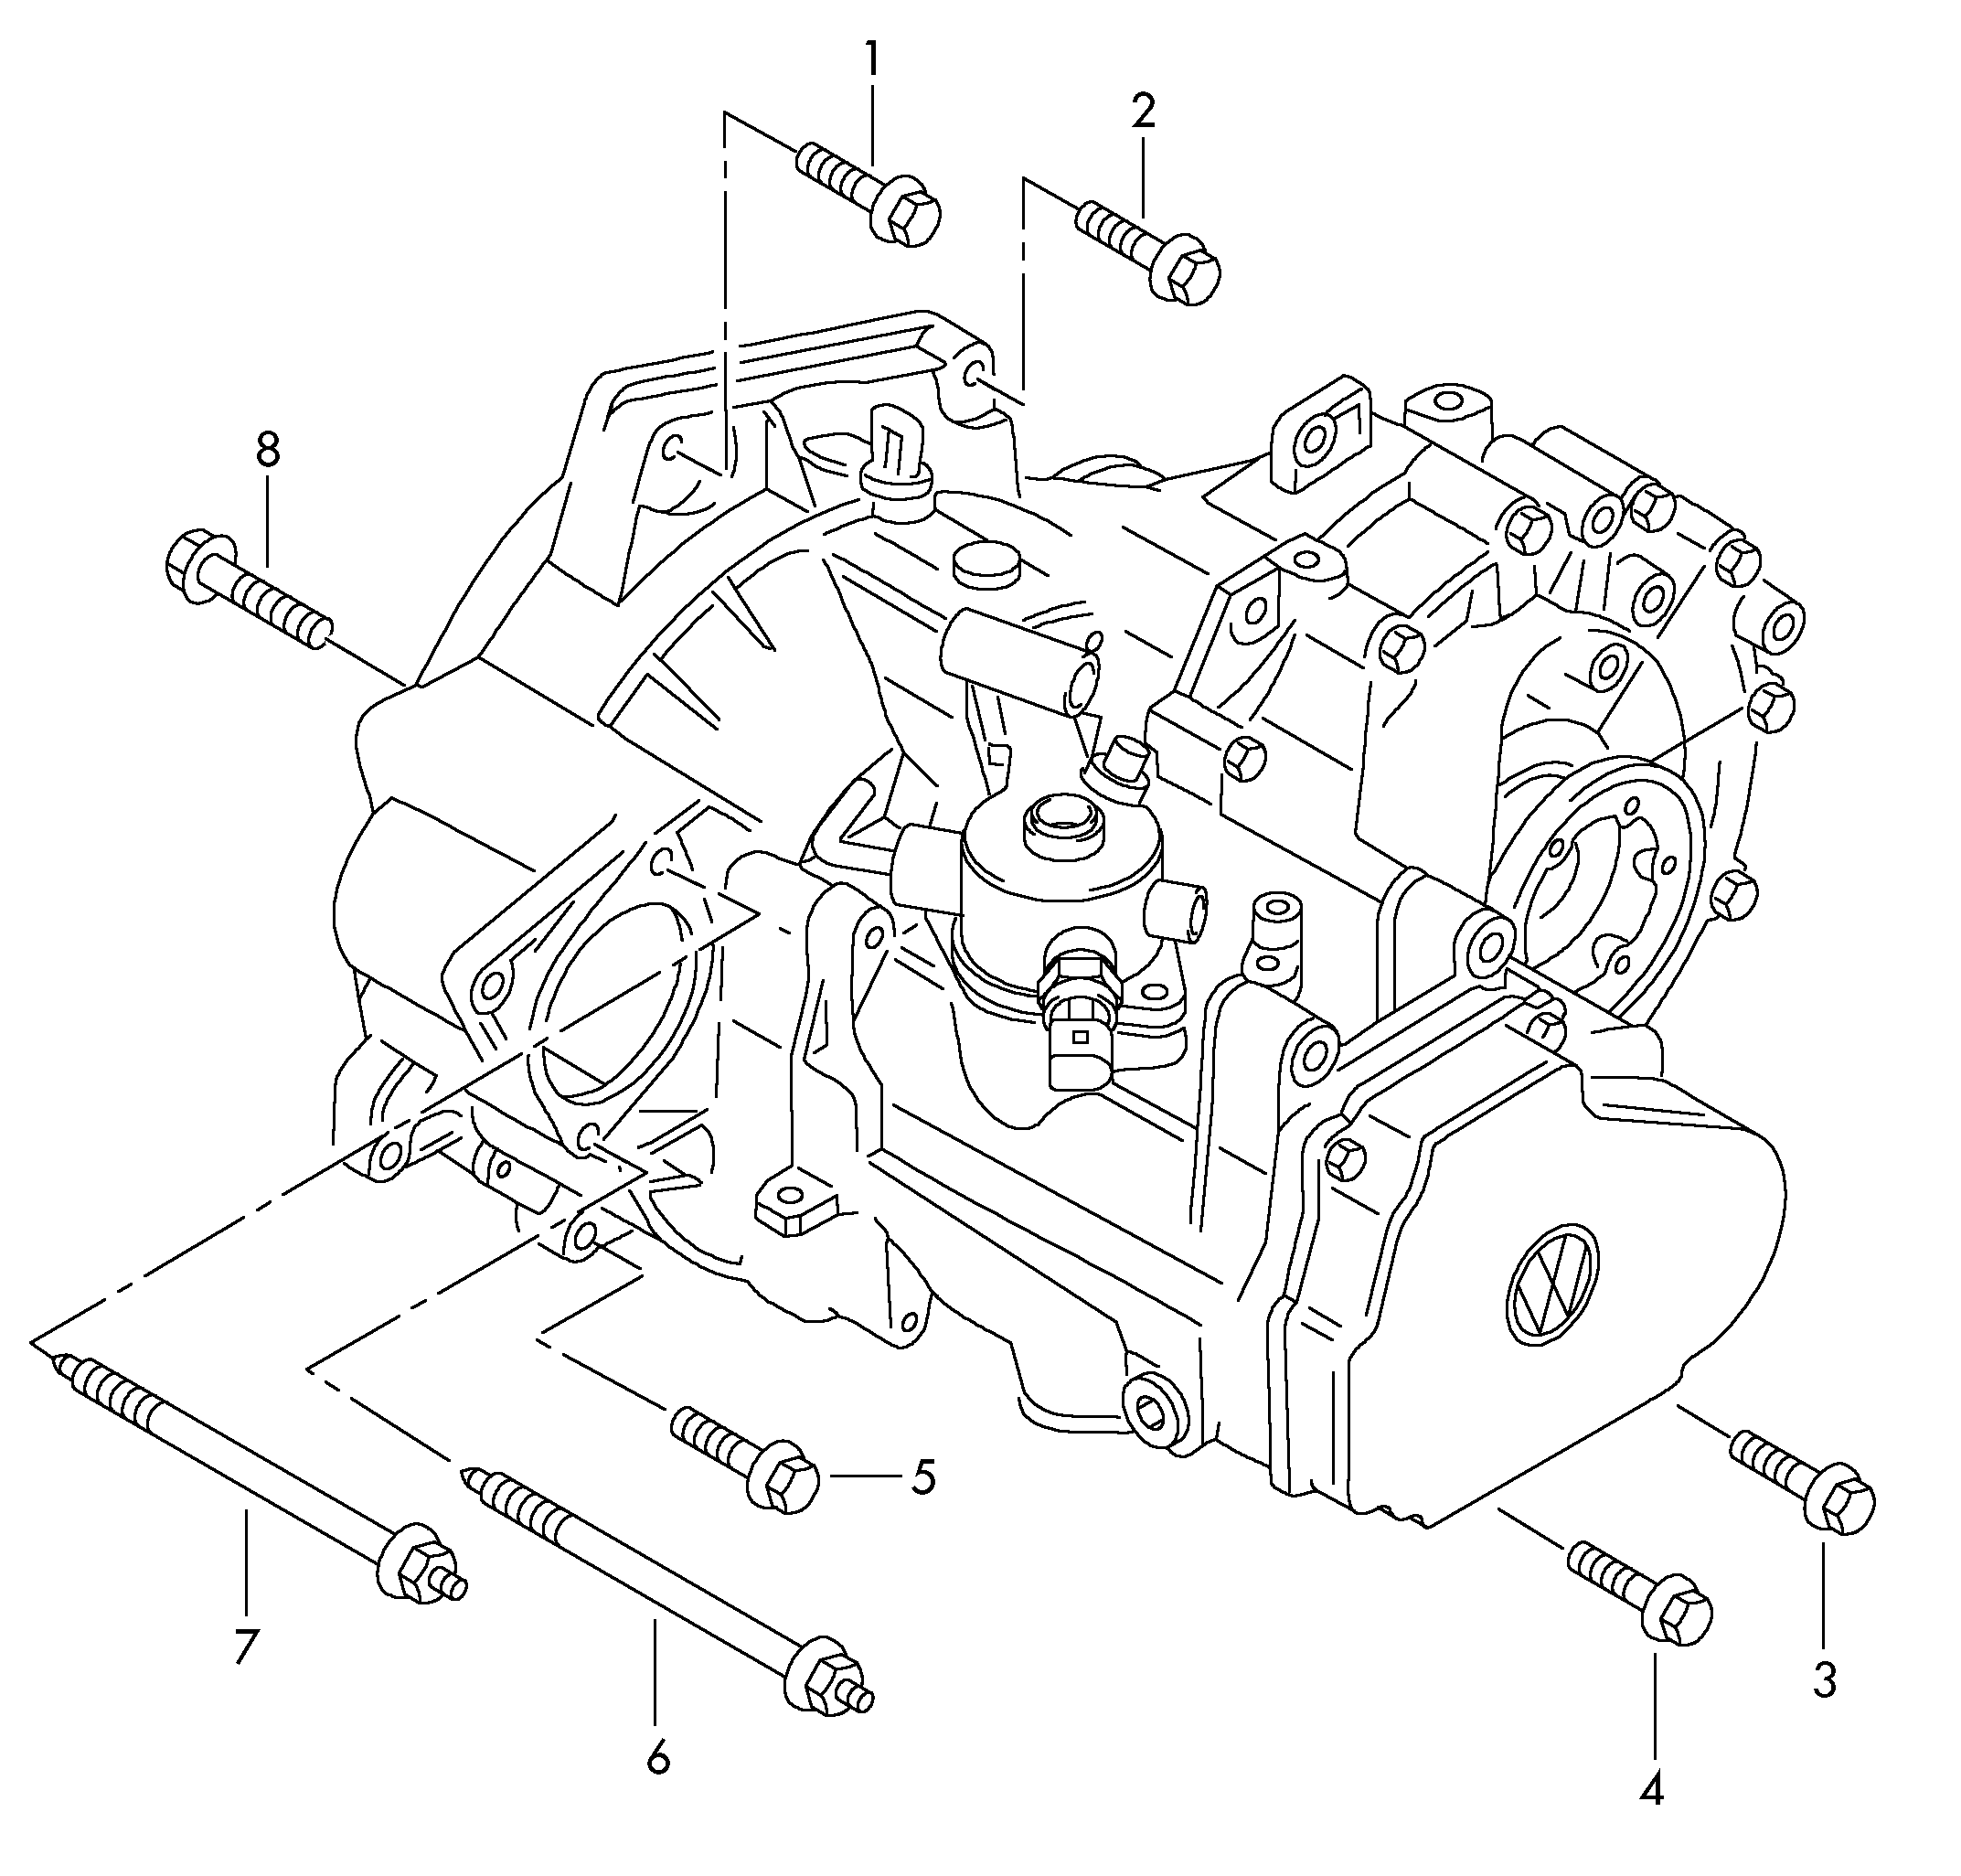 mounting parts for engine and<br>transmission5-speed manual transmission MQ250 - Rapid - rapi